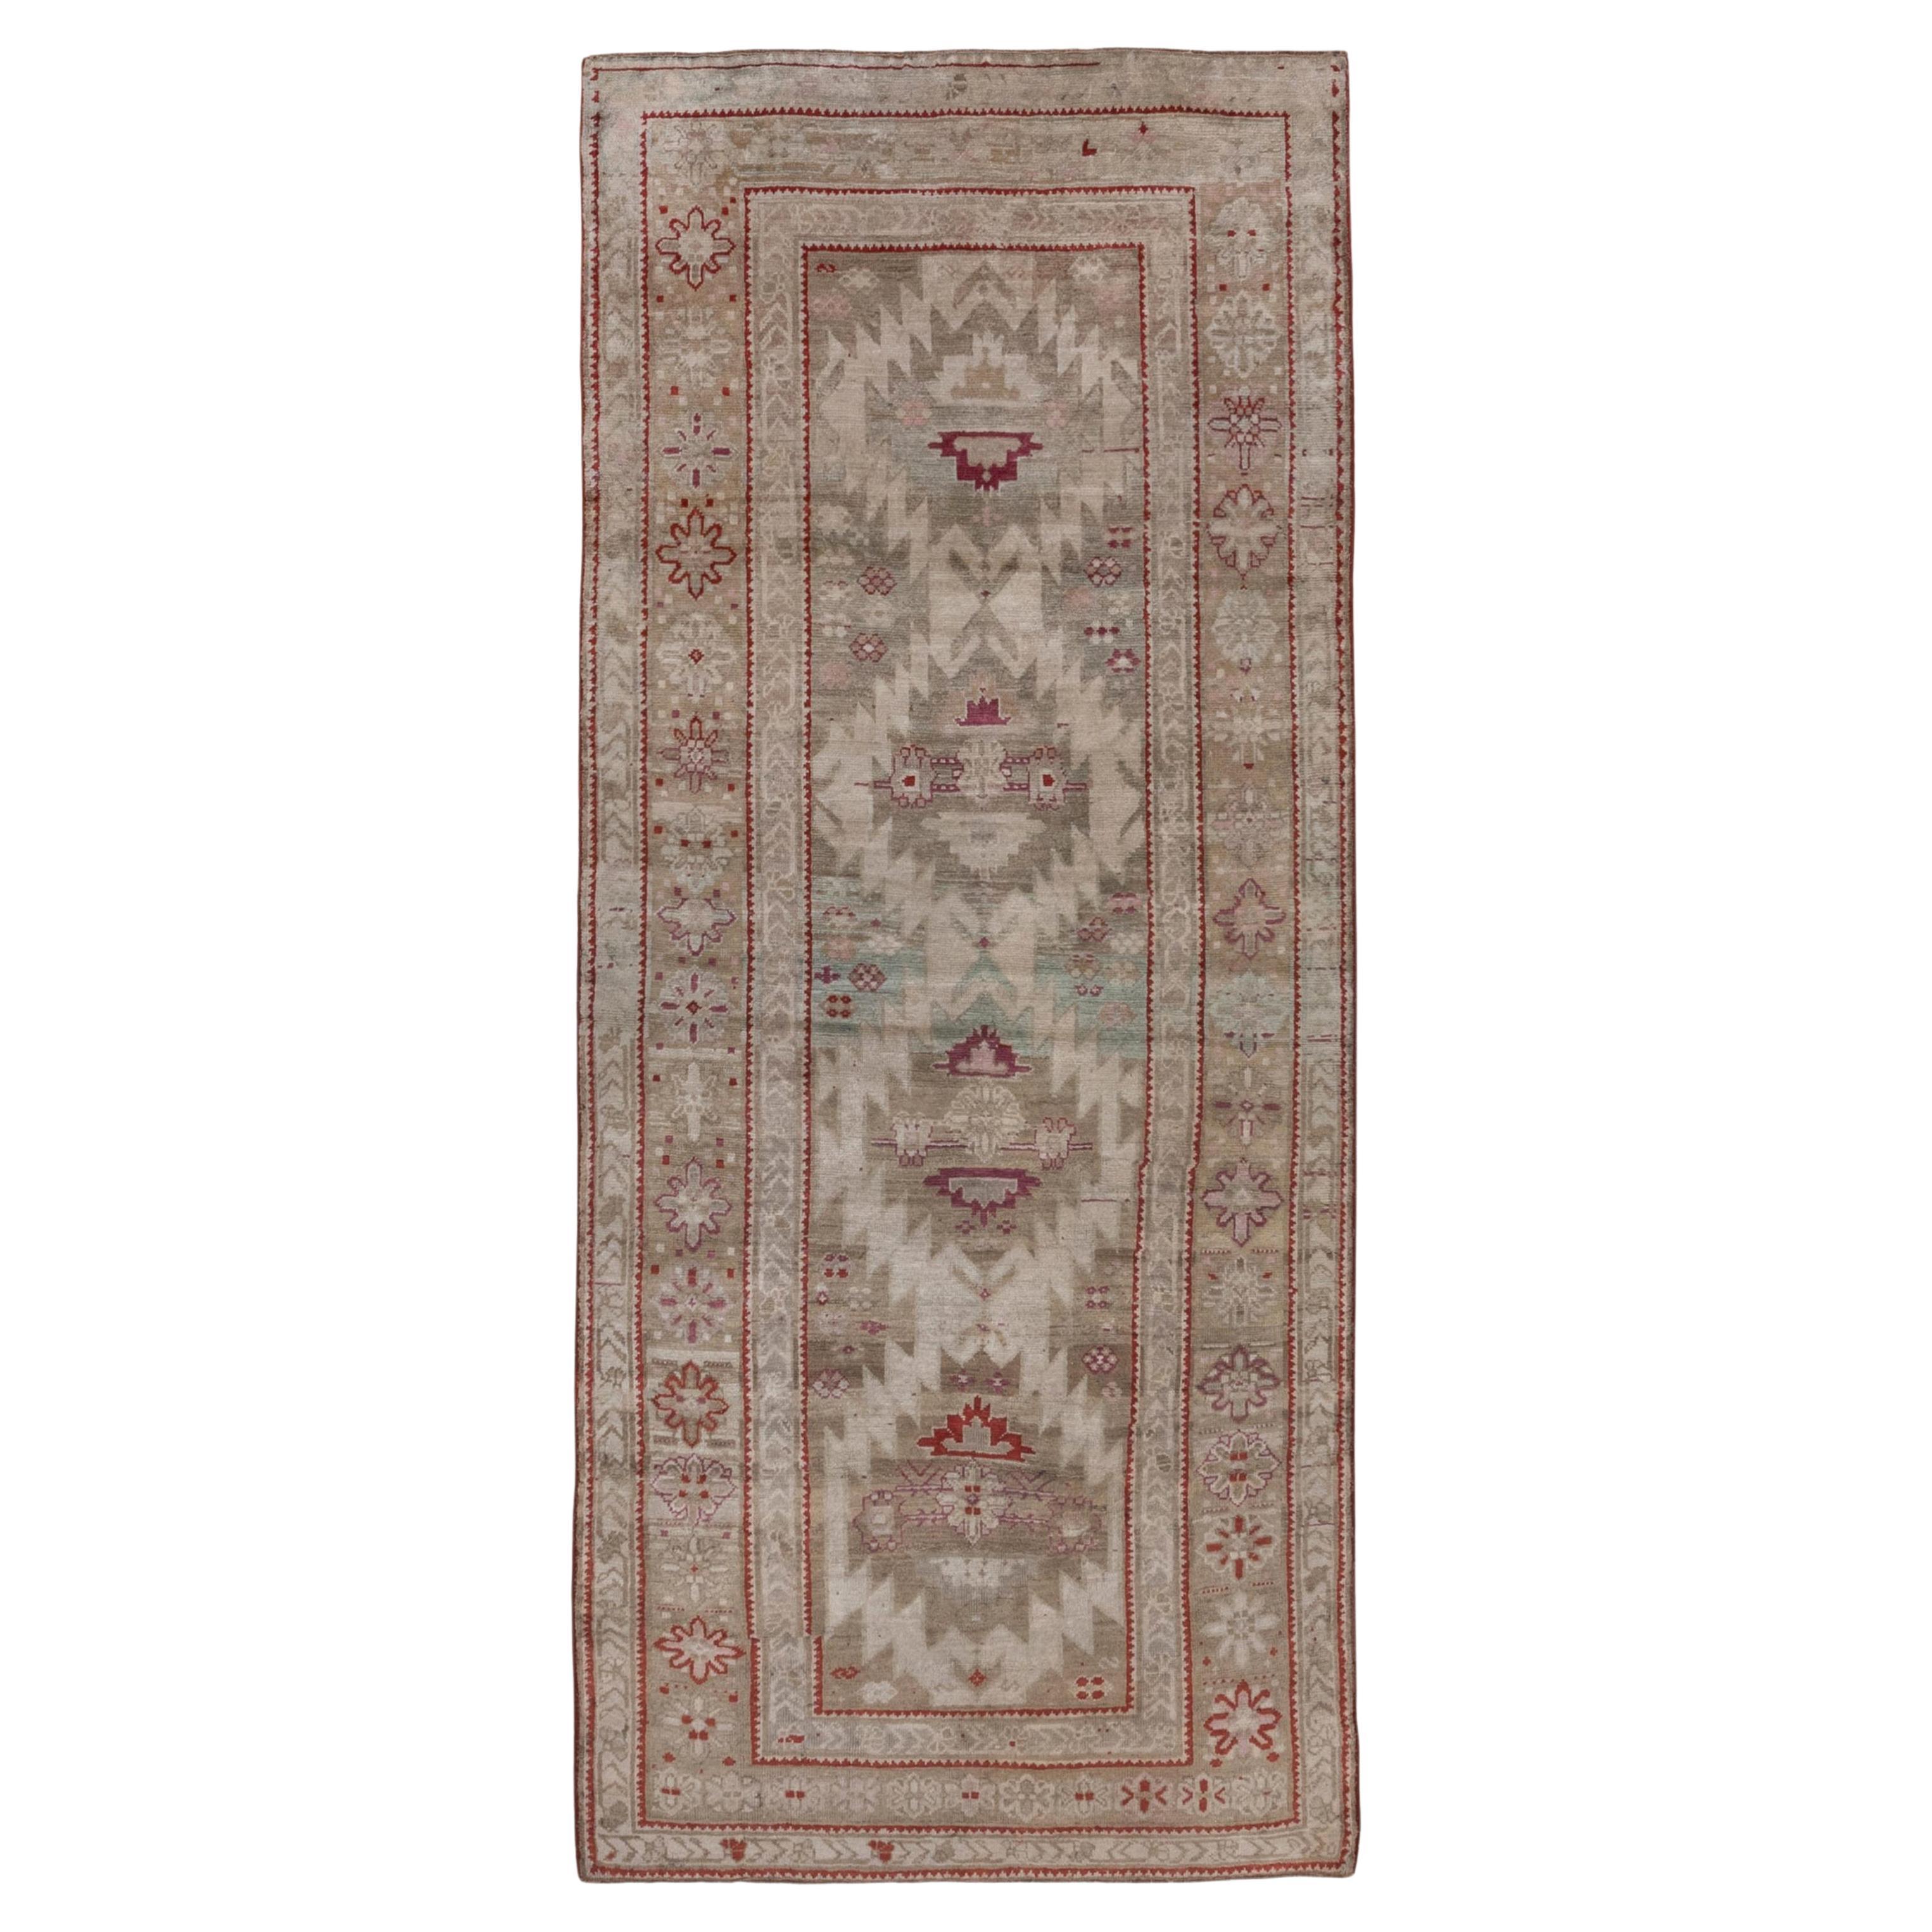 Antique Caucasian Karabagh Rug, Brown and Ivory Field, Red Accents